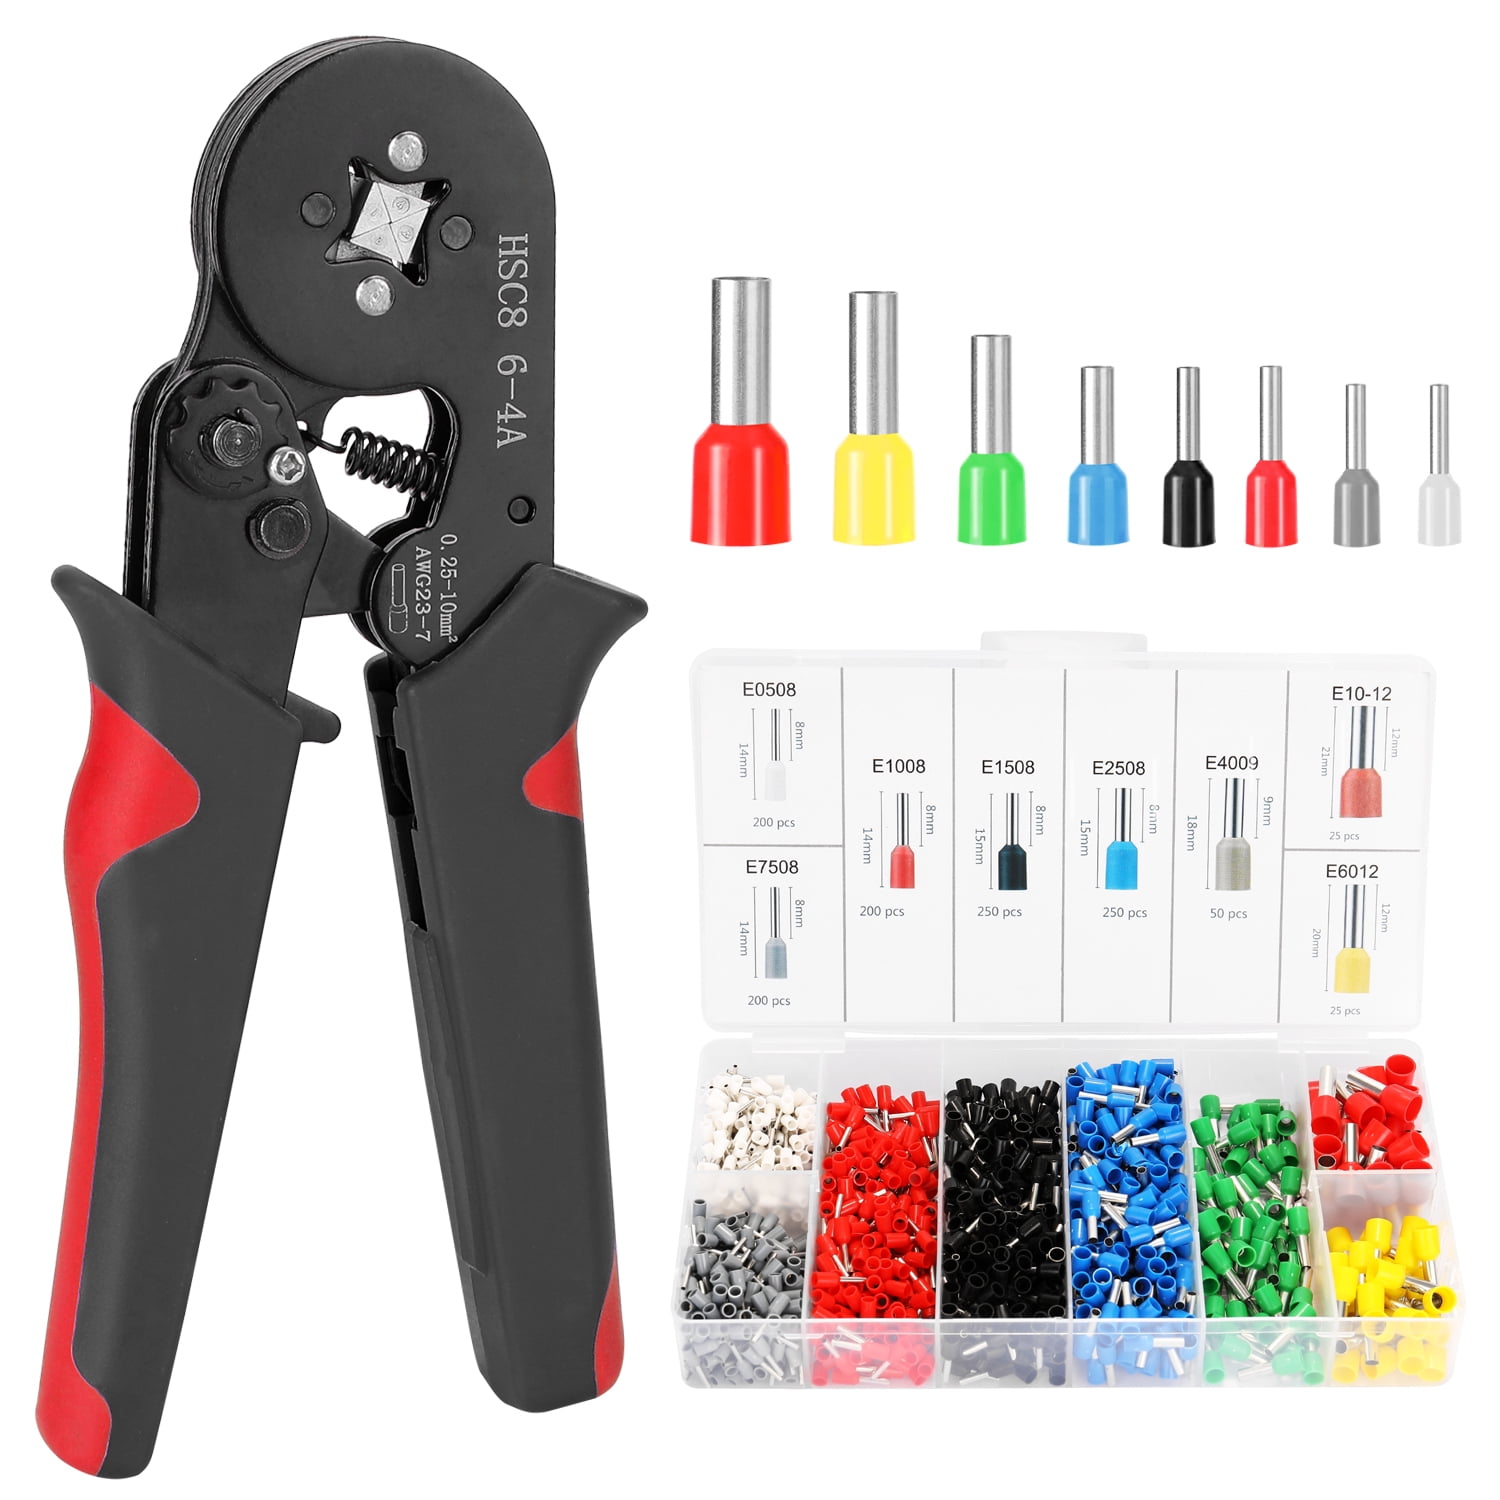 Details about   HSC8 6-6 Mini-type self-adjustable Crimping Plier 0.25-6 mm2 23-10AWG Capacity 